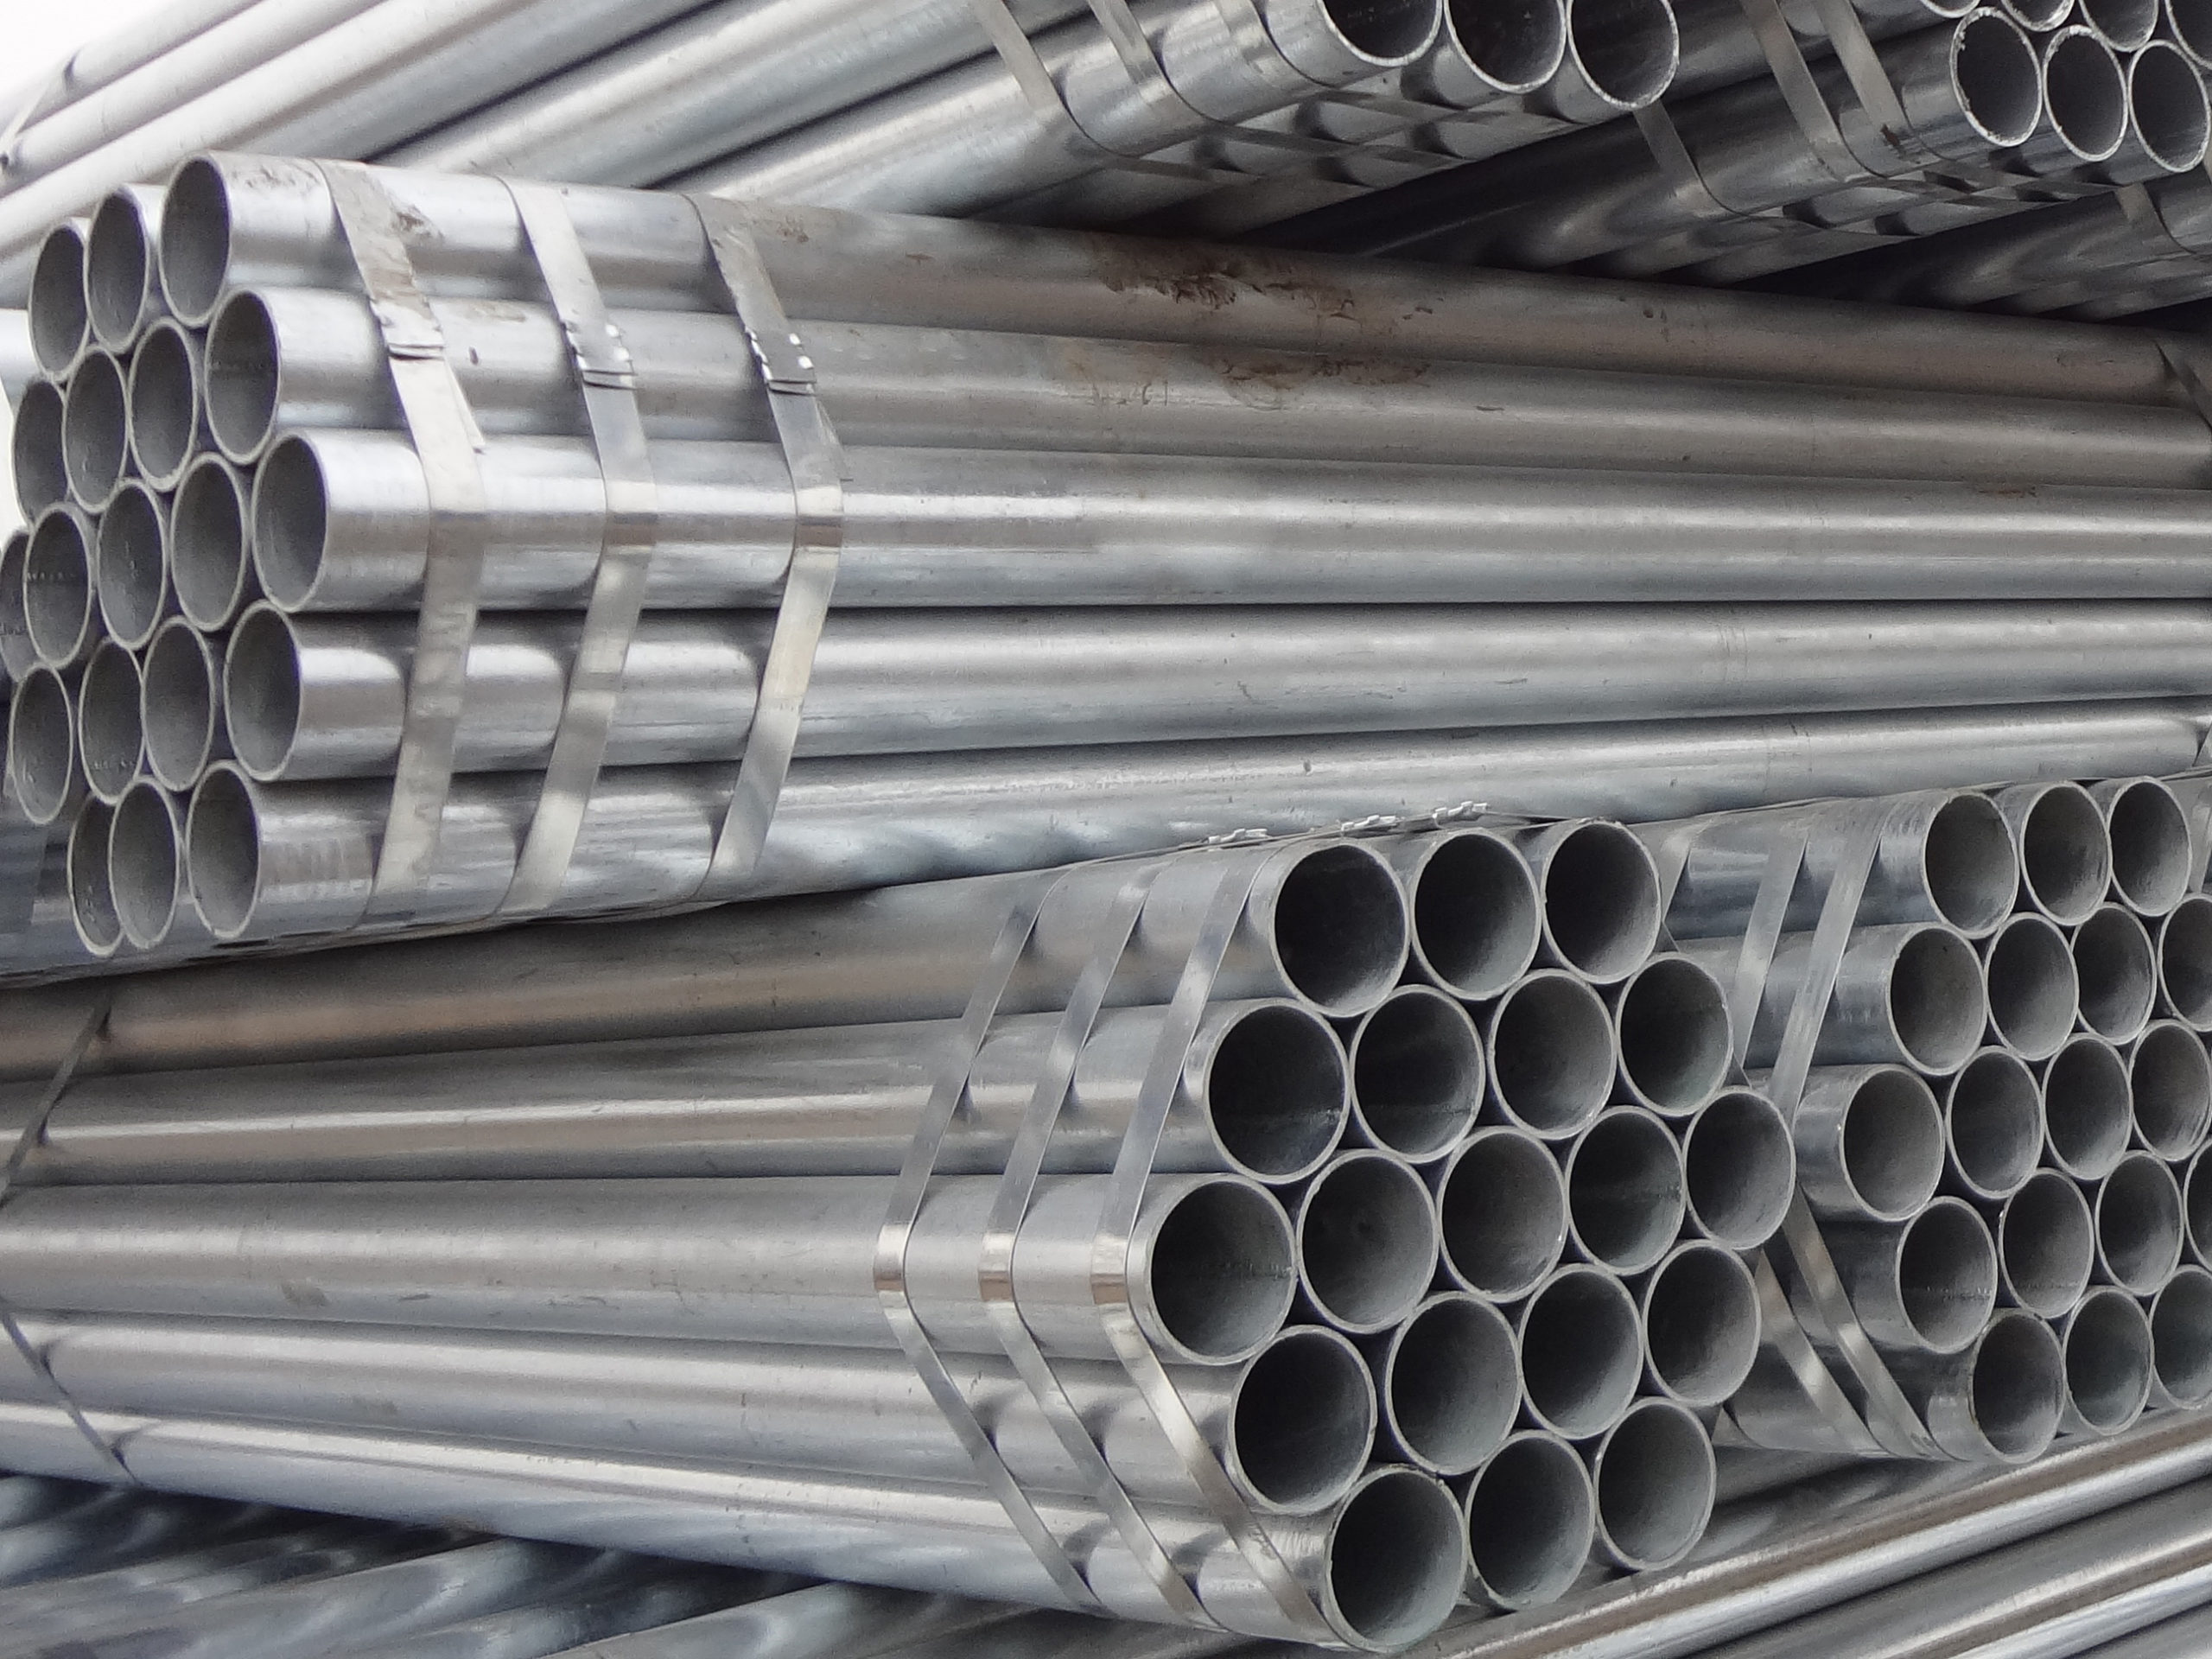 Hot Dipped Galvanized Metal Pipe For Greenhouse